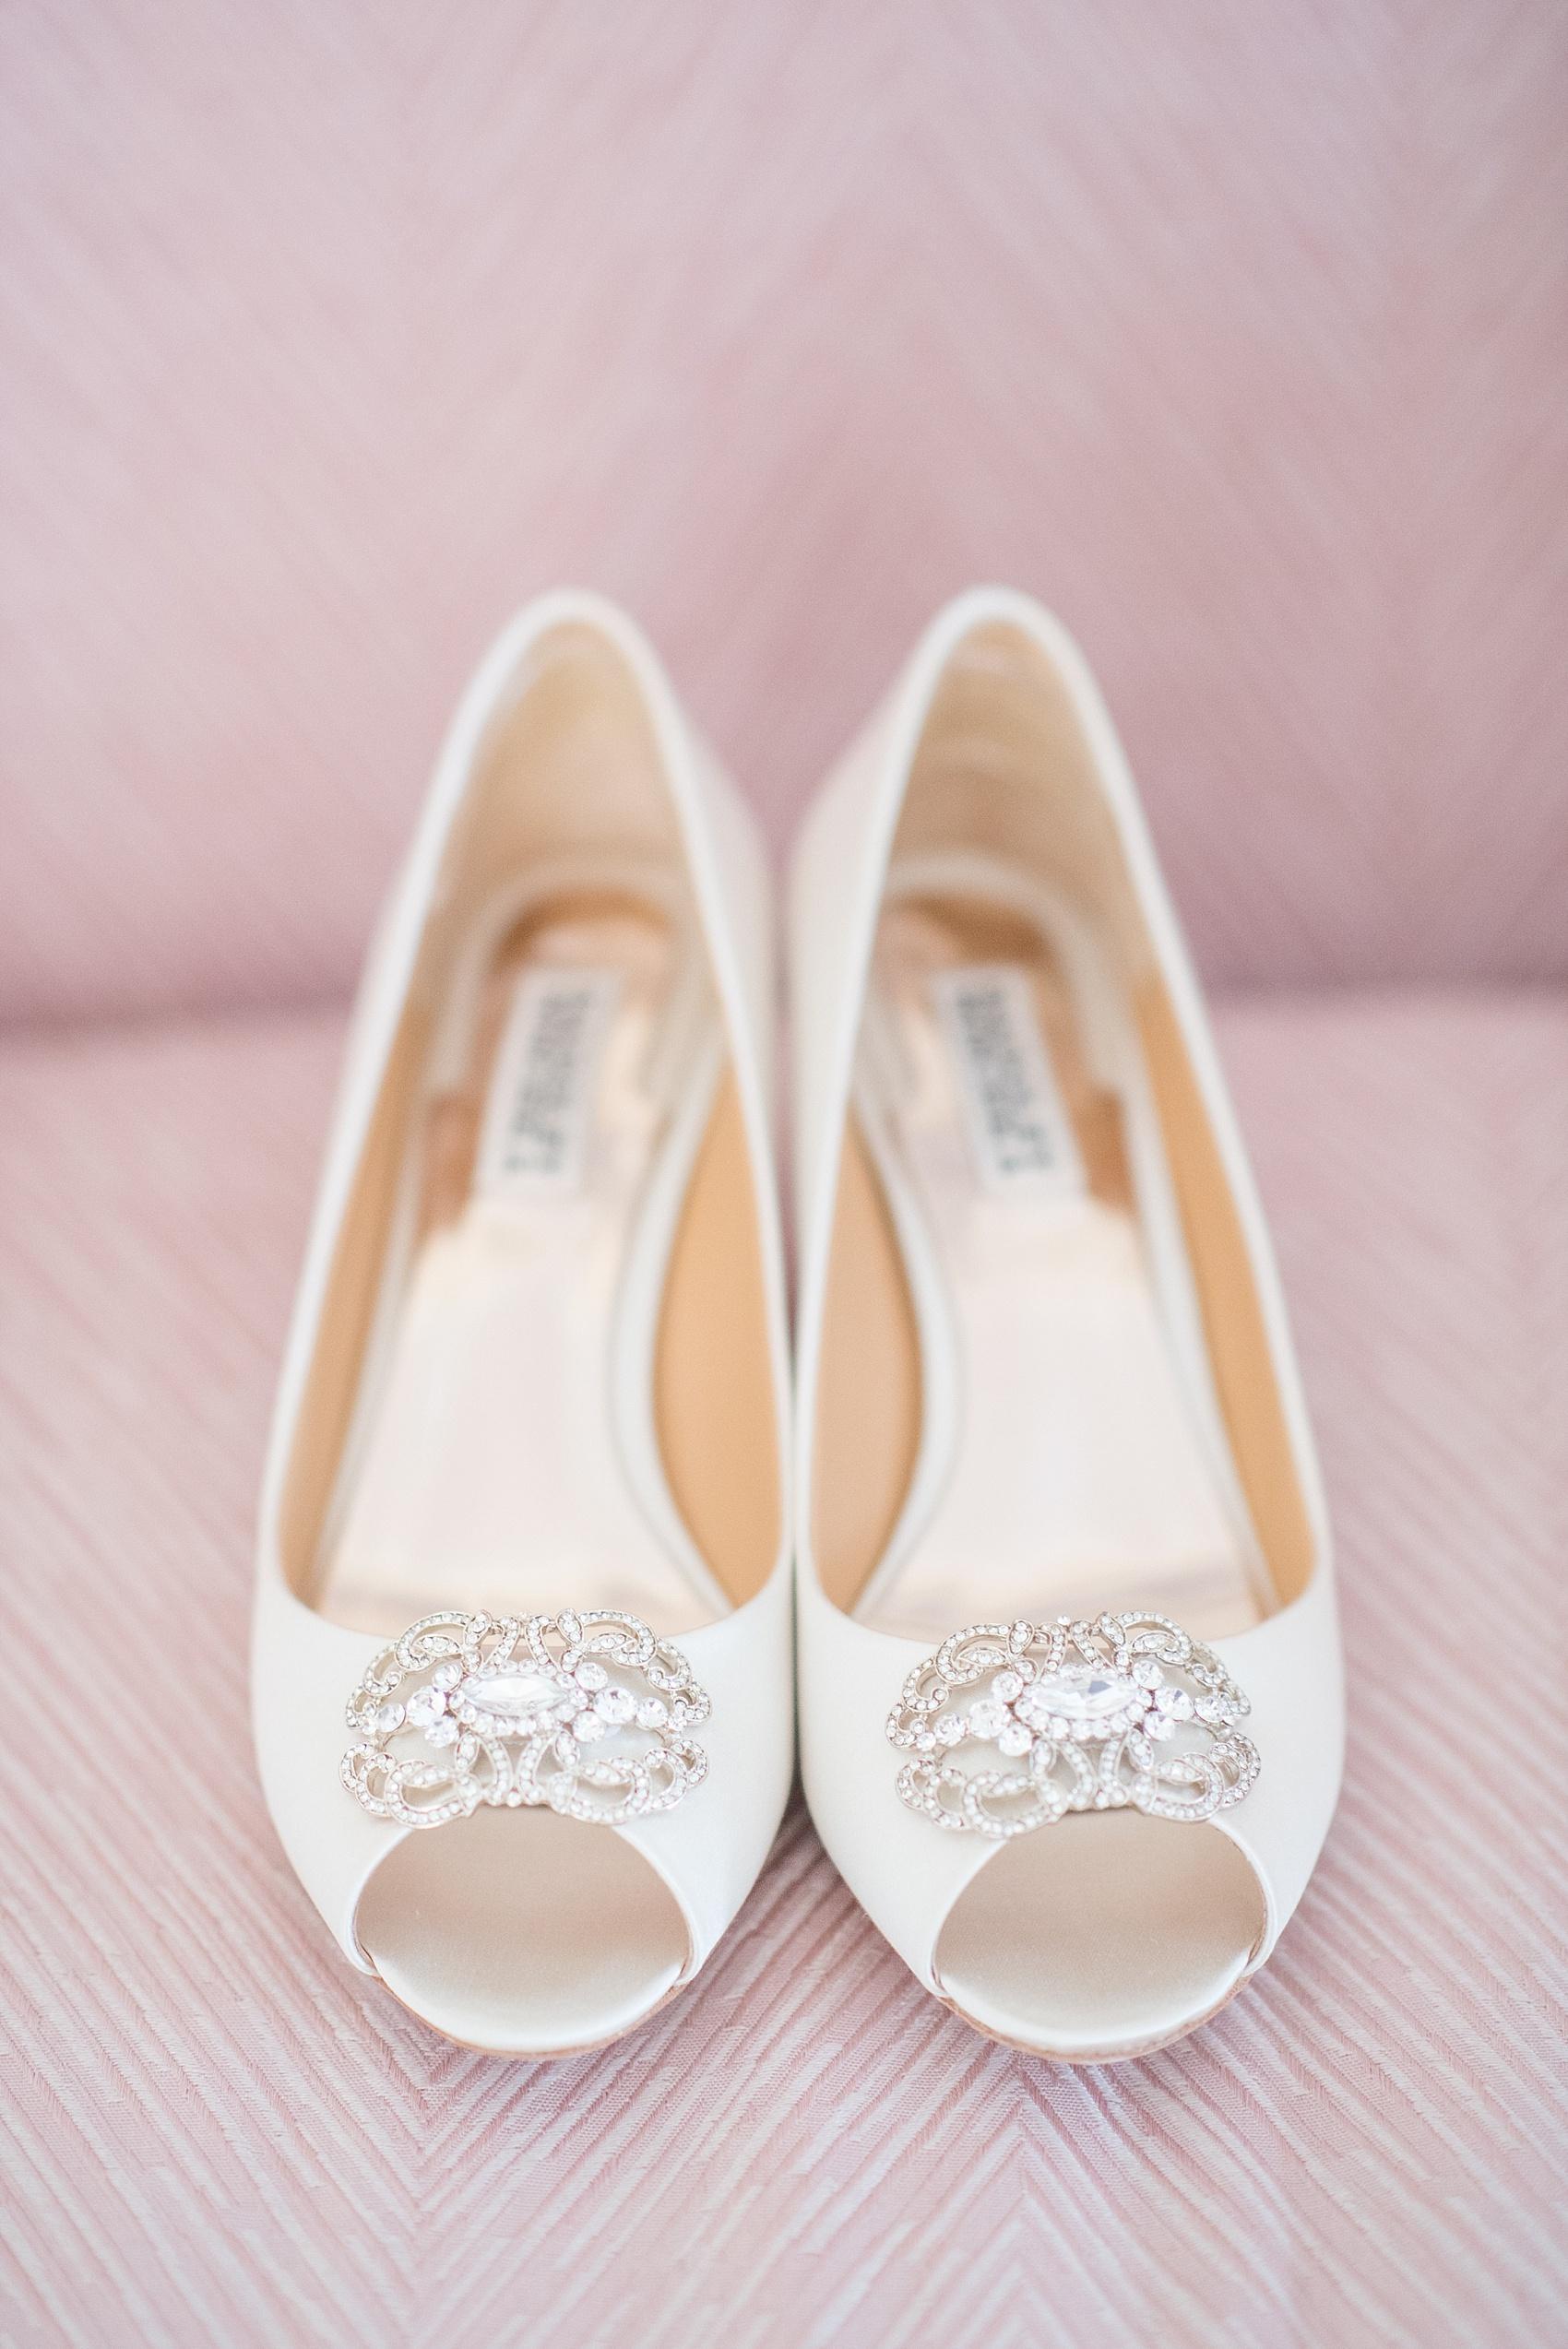 White Badgley Mischka jeweled bridal heels image by Mikkel Paige Photography for a wedding at Harbor Club on Long Island. 